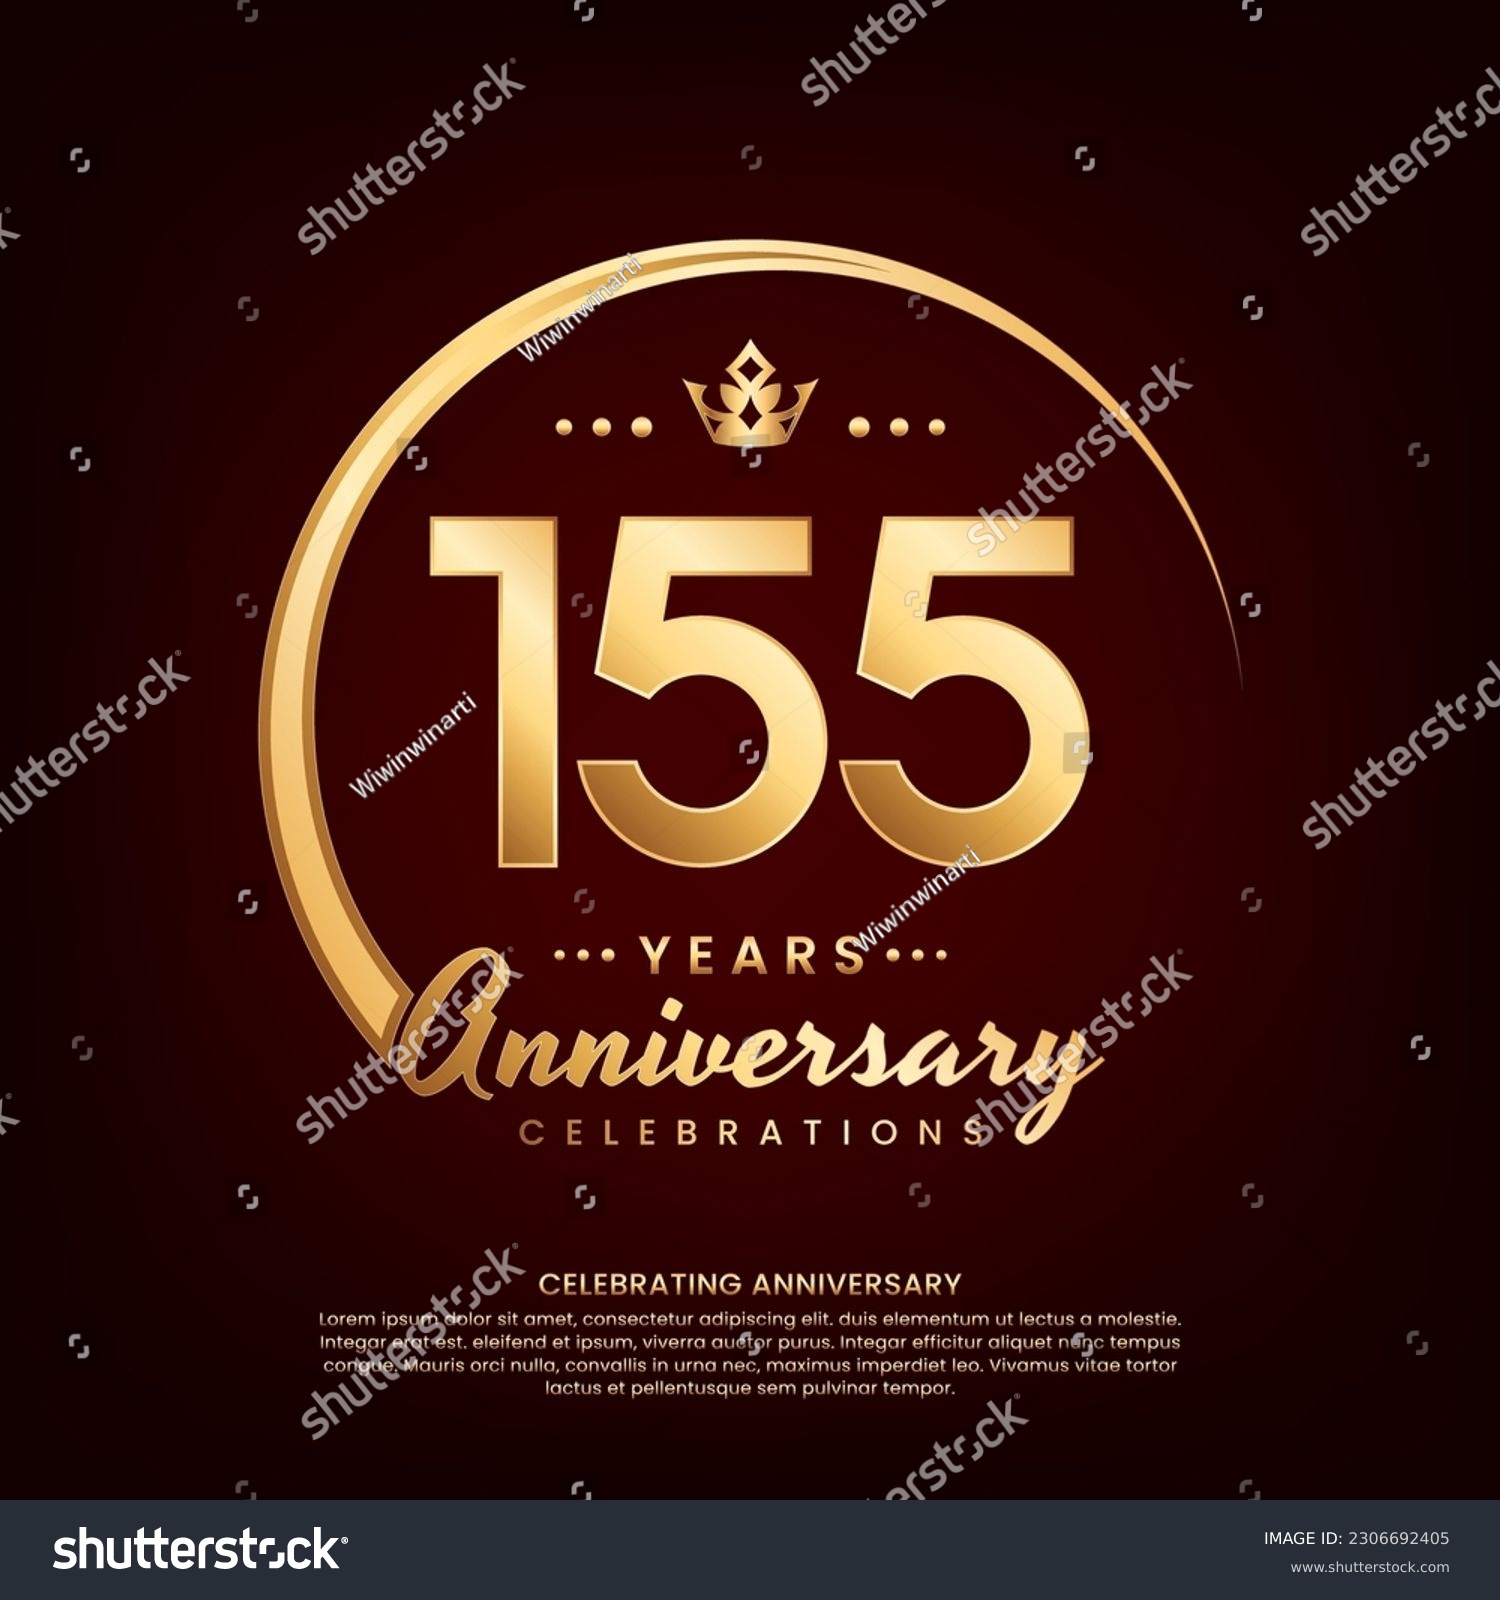 155 year anniversary template design with golden - Royalty Free Stock ...